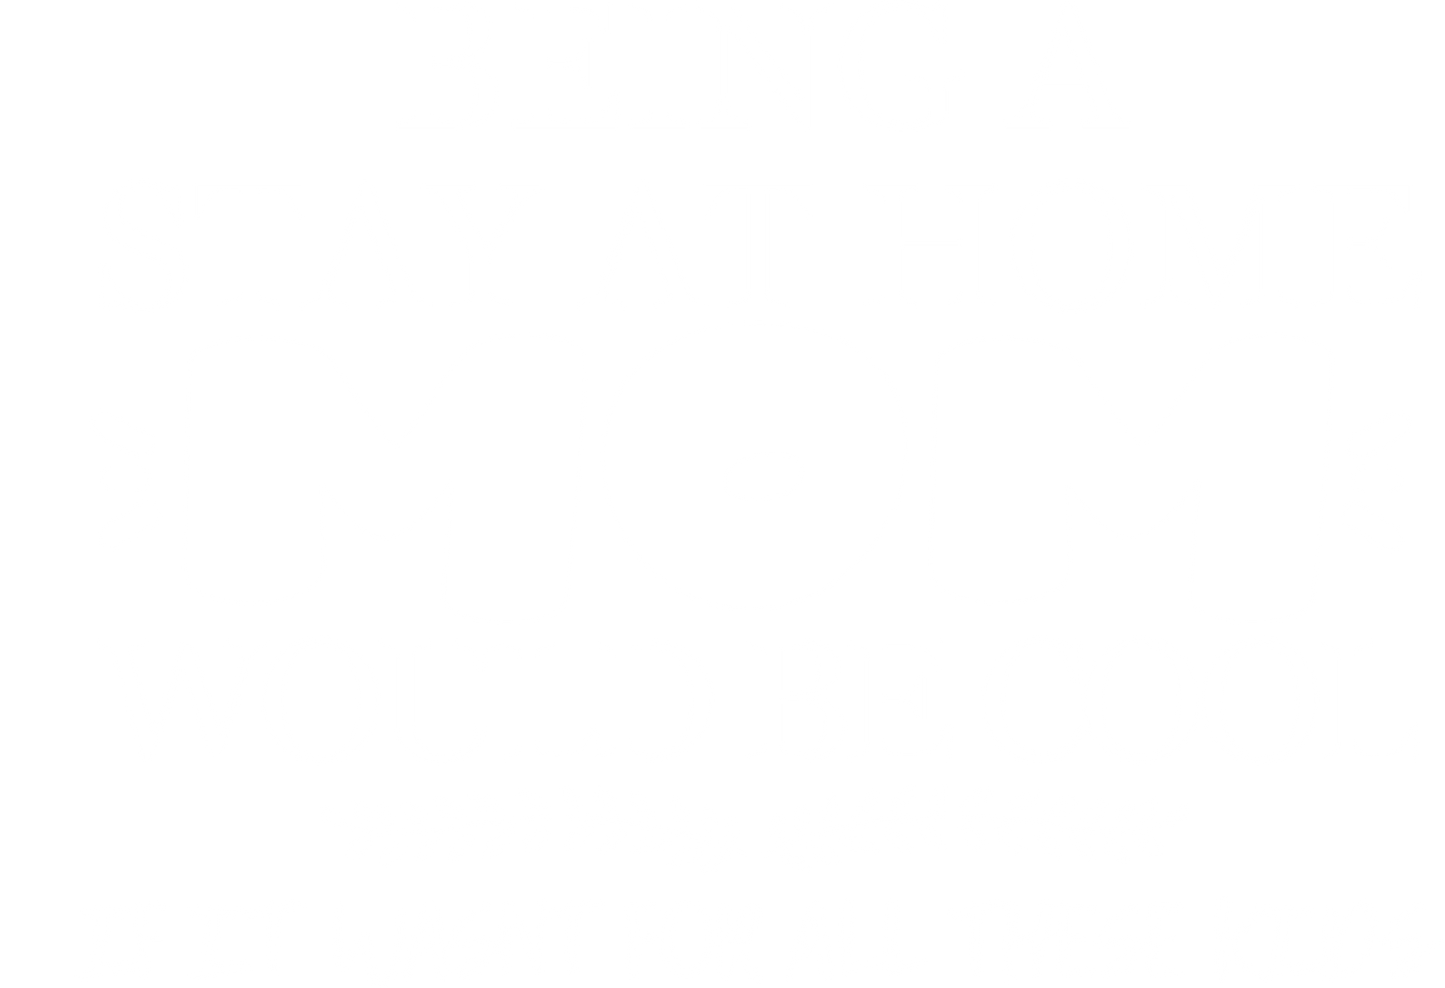 Being A Stay At Home Mom Would Be Cool